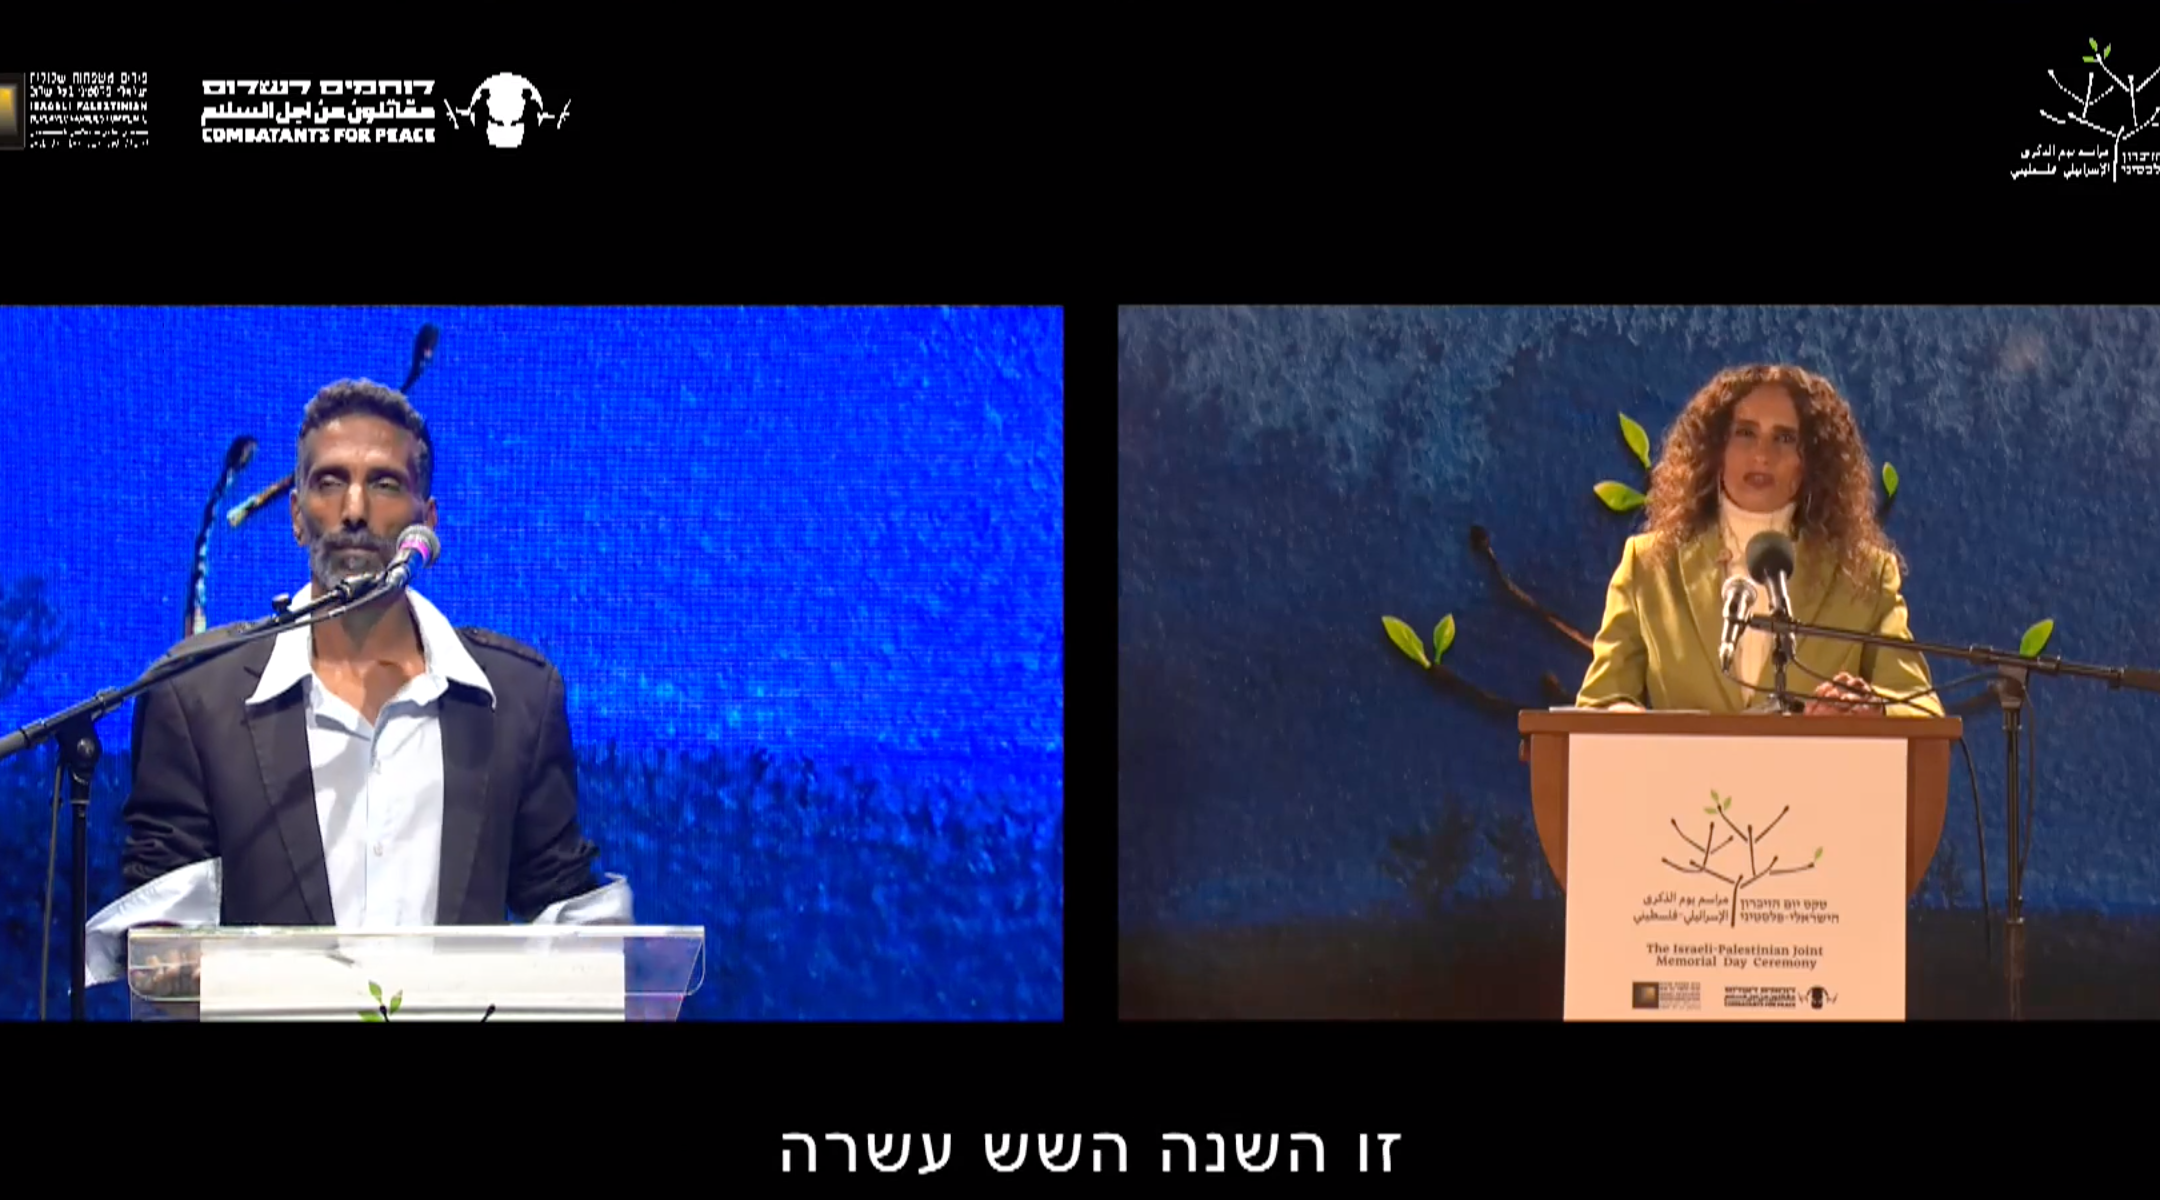 A joint Israeli-Palestinian Memorial Day service, co-hosted by the Parents Circle Families Forum and Combatants for Peace and held virtually this year, has sparked heated debate in Israel. (Screen shot)